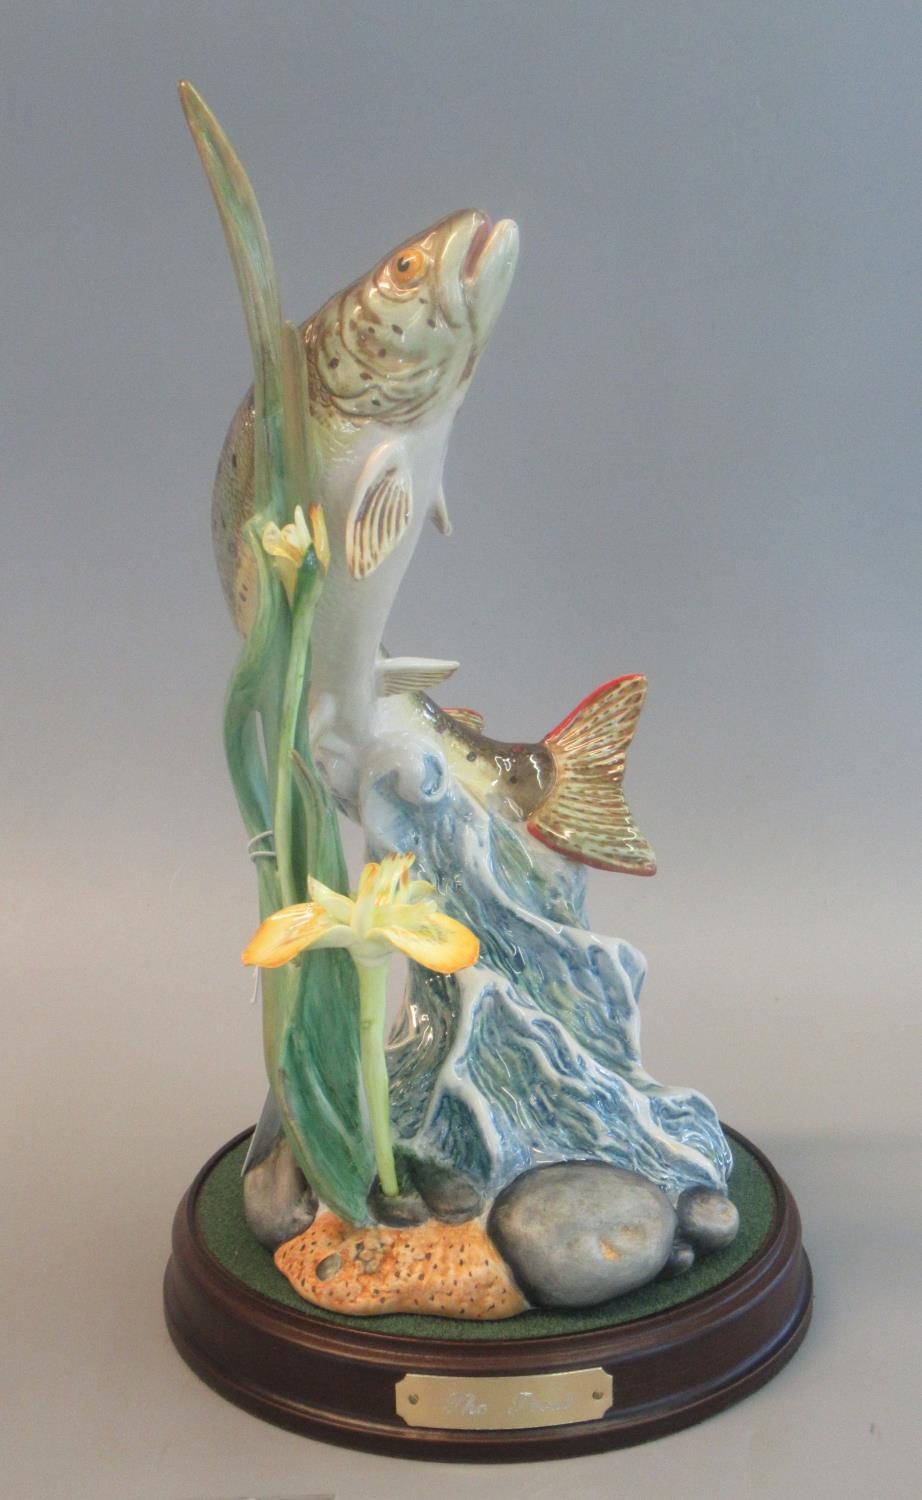 Royal Doulton china study 'The Trout' DA172, modeled by J.G Tongue, printed marks to base. 29cm high